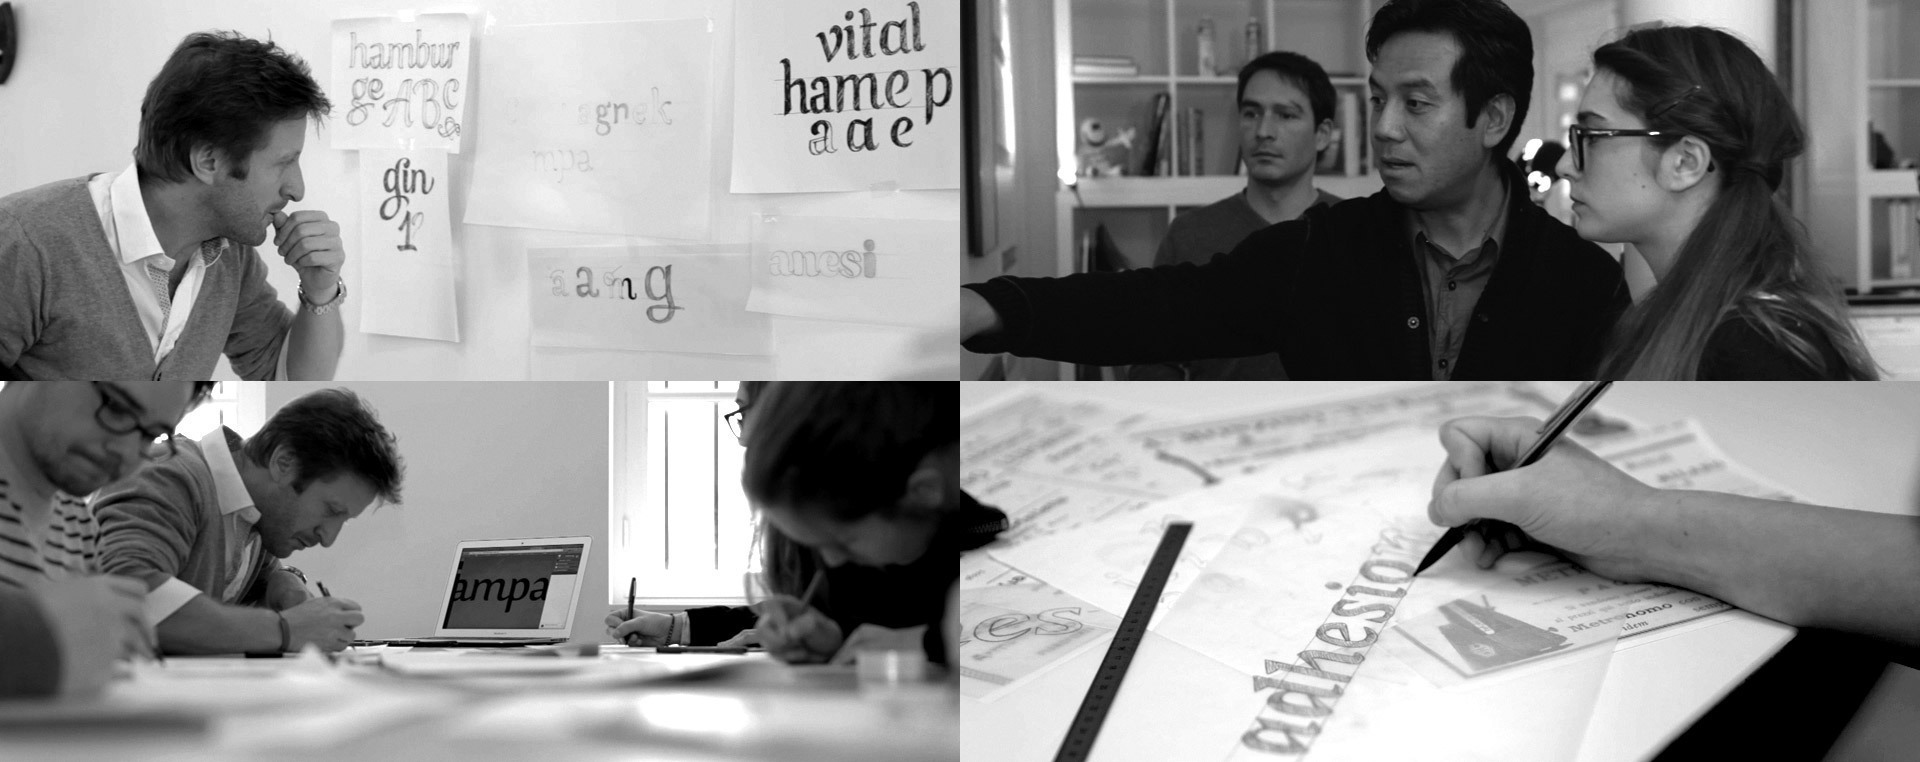 Clockwise from top left: Grégori Vincens evaluating typographic concepts; Gia Tran (middle) discussing a type project with Jérémie Hornus (left) and Valentine Proust (right); drawing type; the Fontyou studio at work.